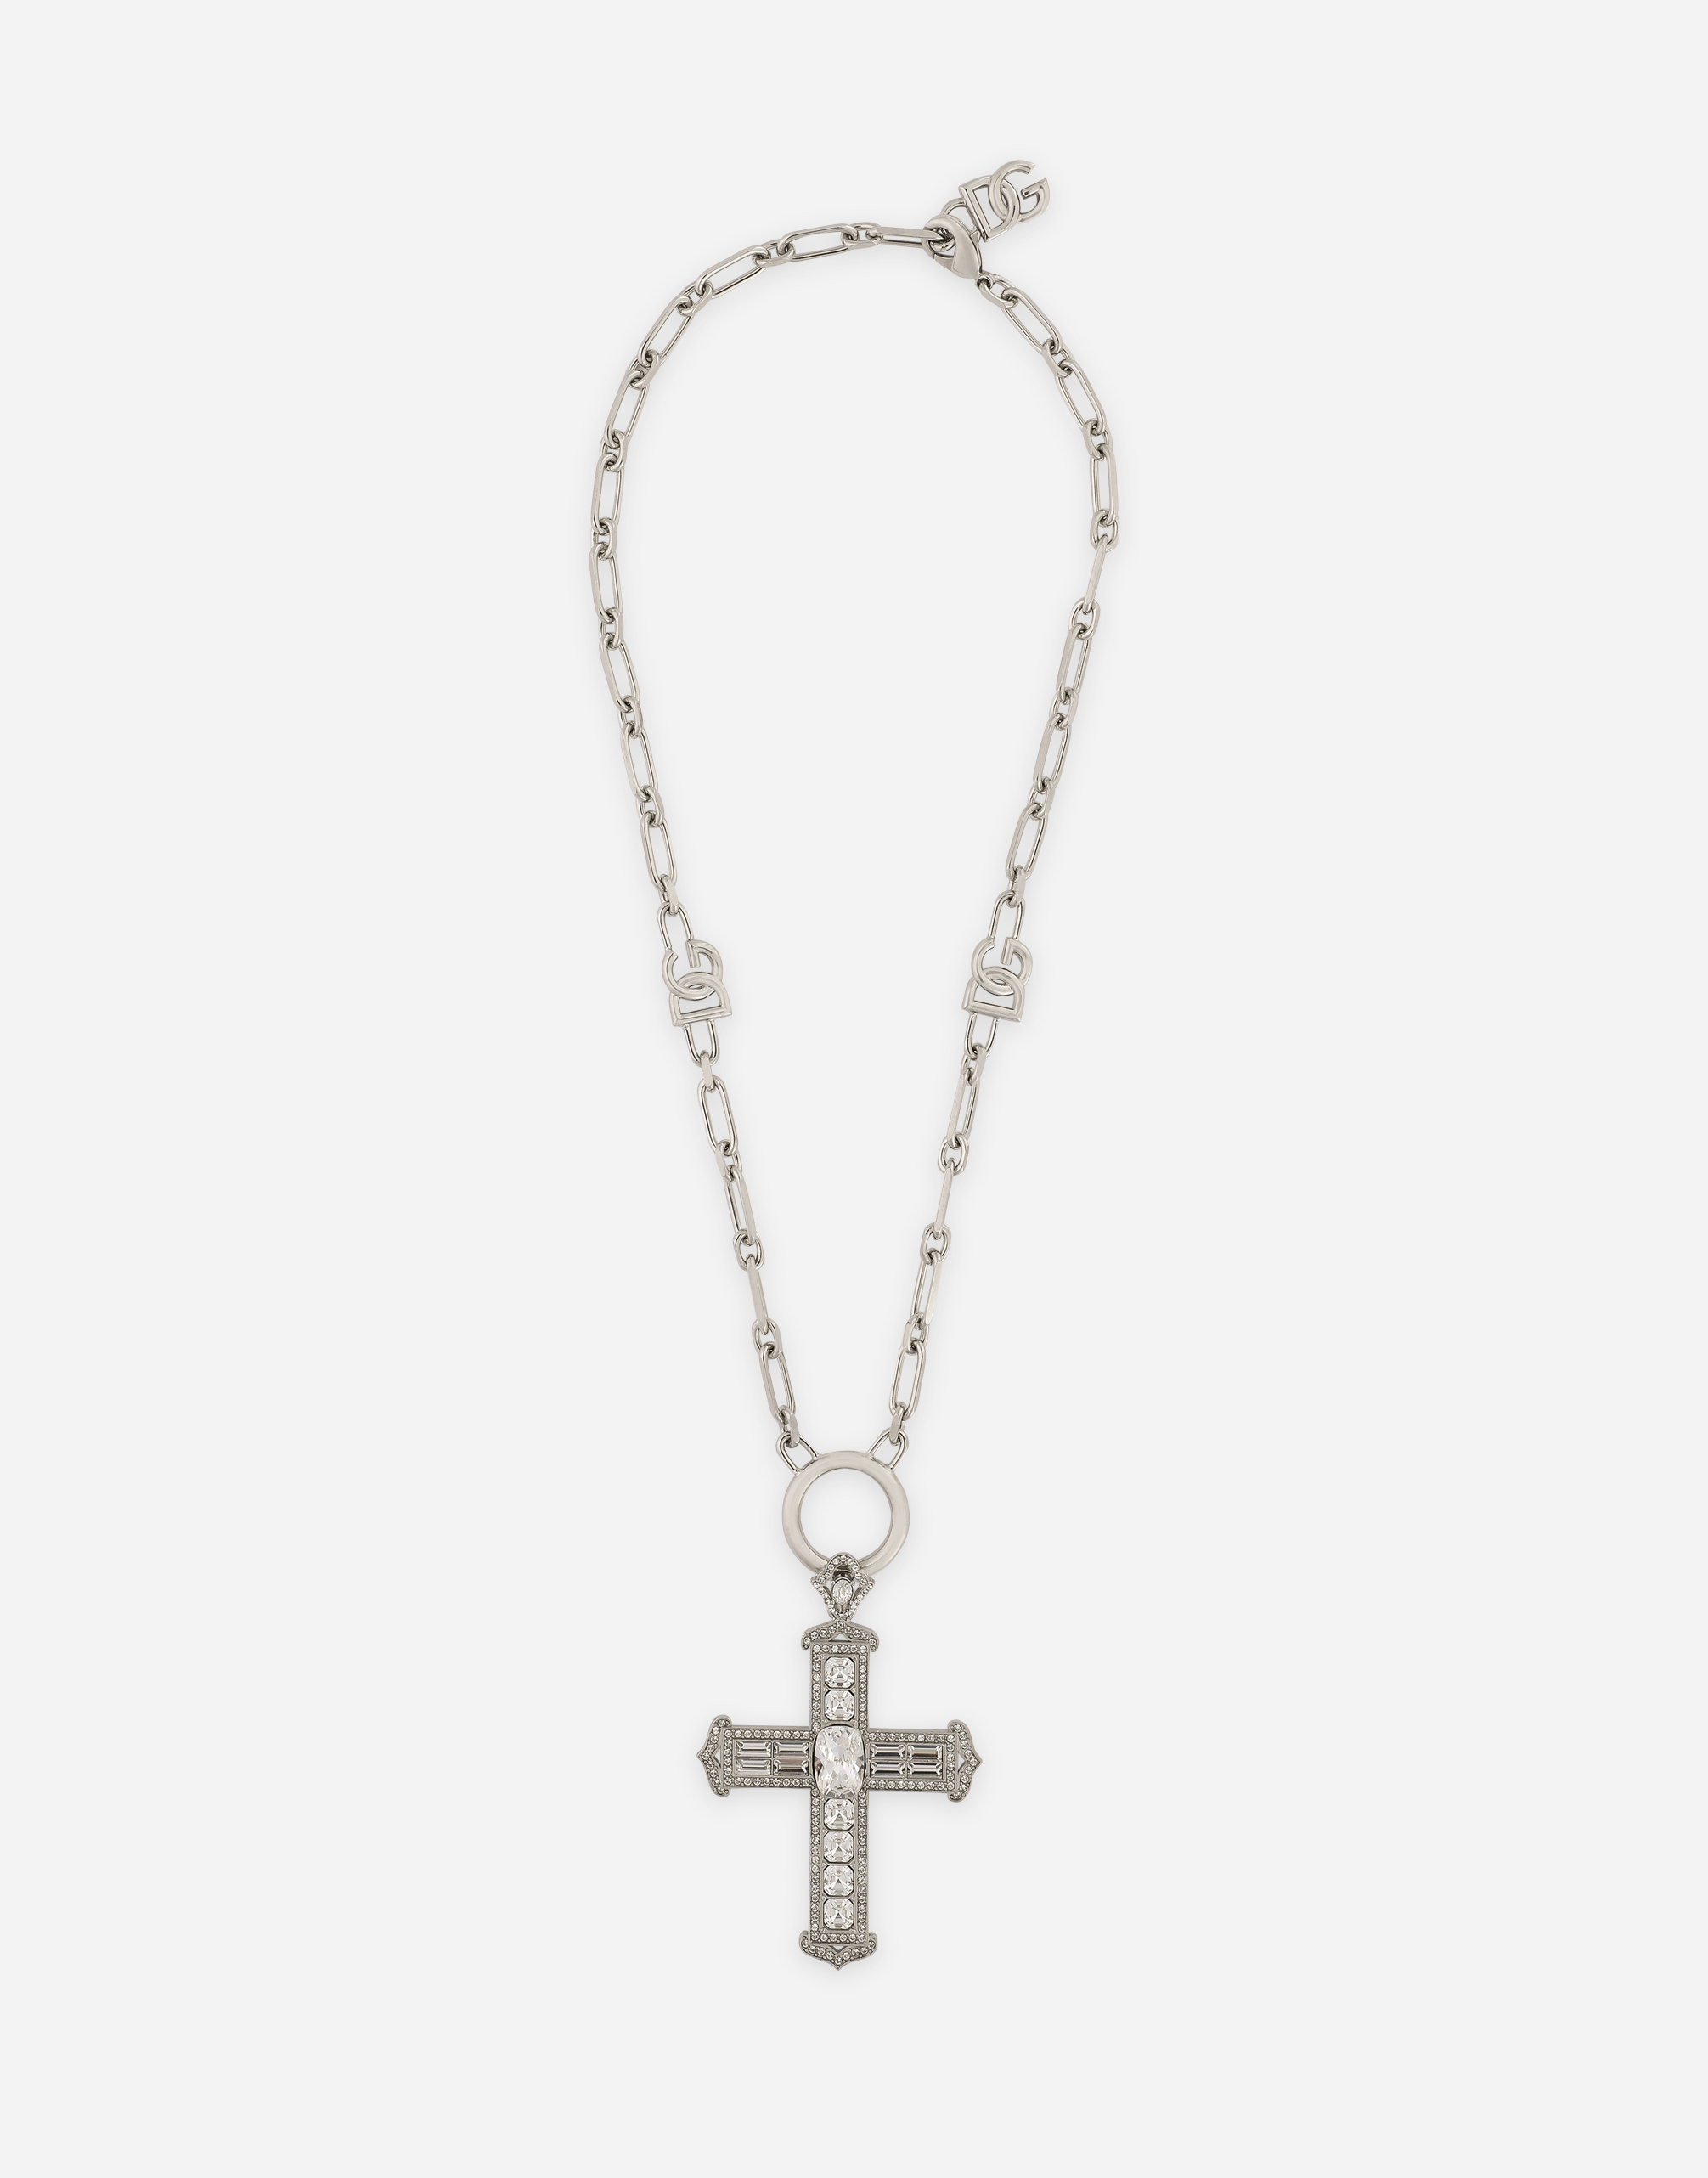 Chain necklace with cross and crystals in Silver